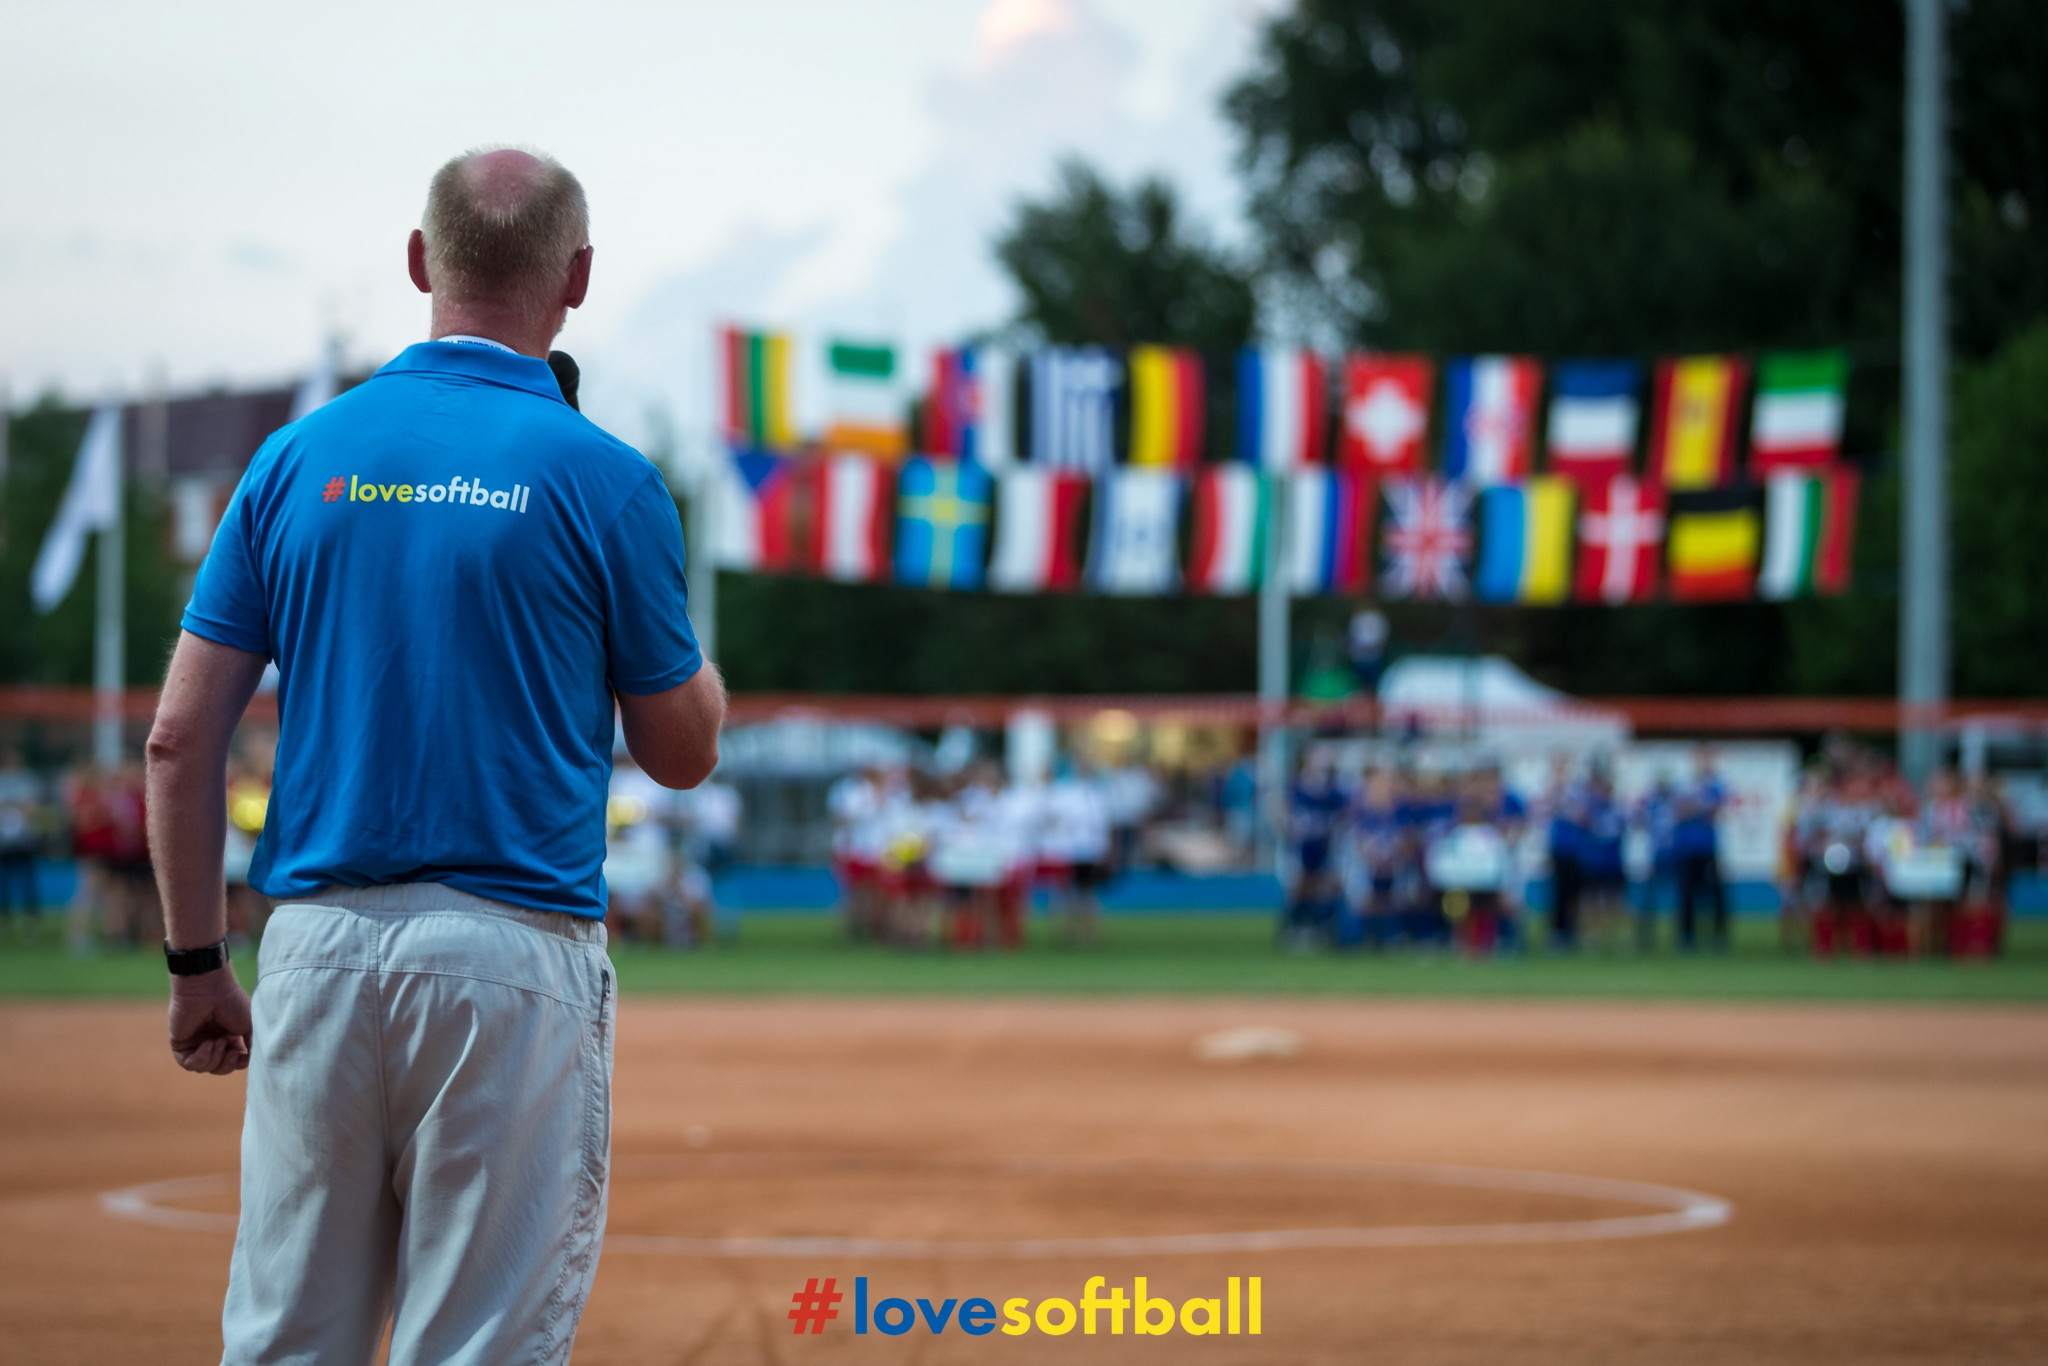 Hosts of cancelled 2020 events have agreed to stage competitions in 2021 or 2022 ©Softball Europe